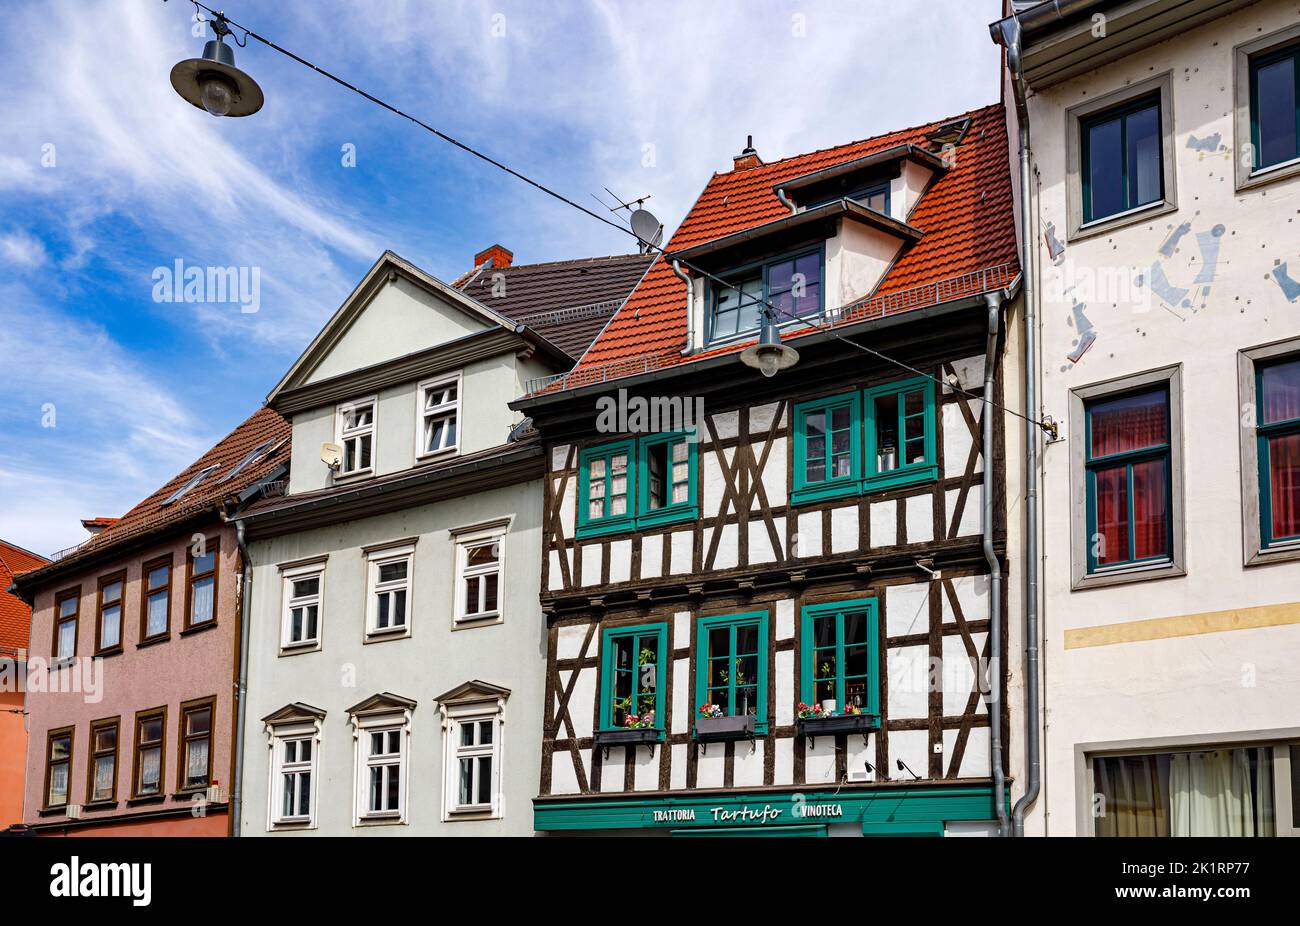 Restored House Facades At Cathedral Square In Erfurt, Thuringia, Germany, Europe Stock Photo